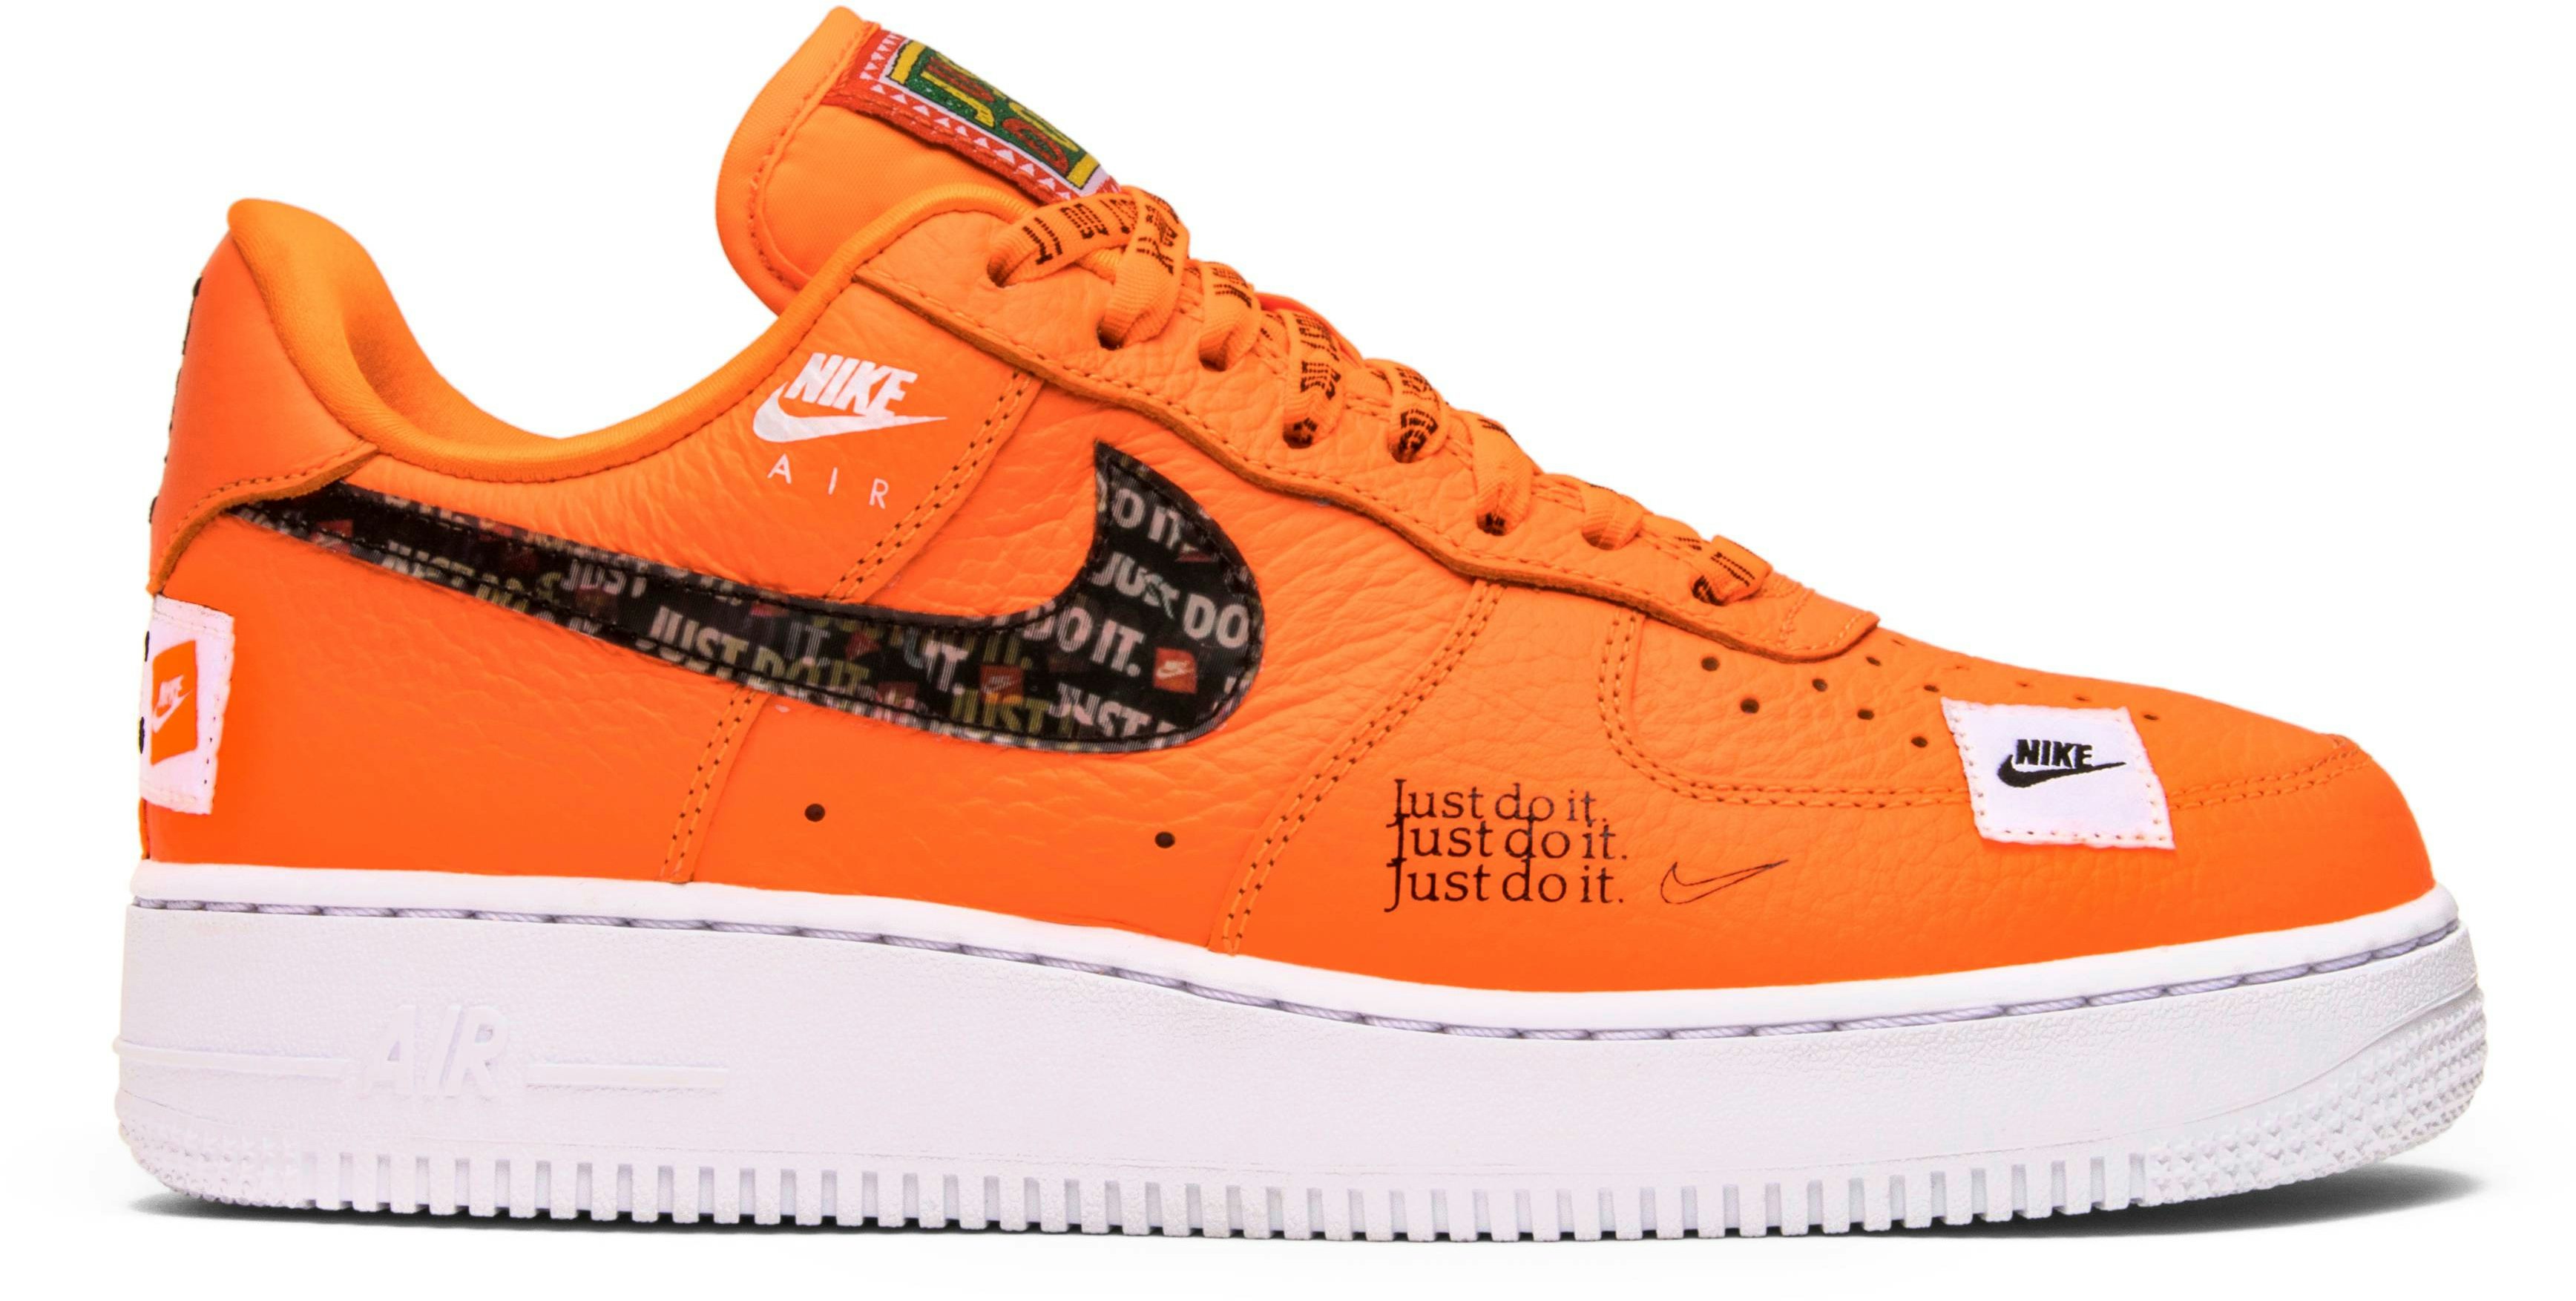 AIRFORCE 1 JUST DO IT PACK TOTAL ORANGE②